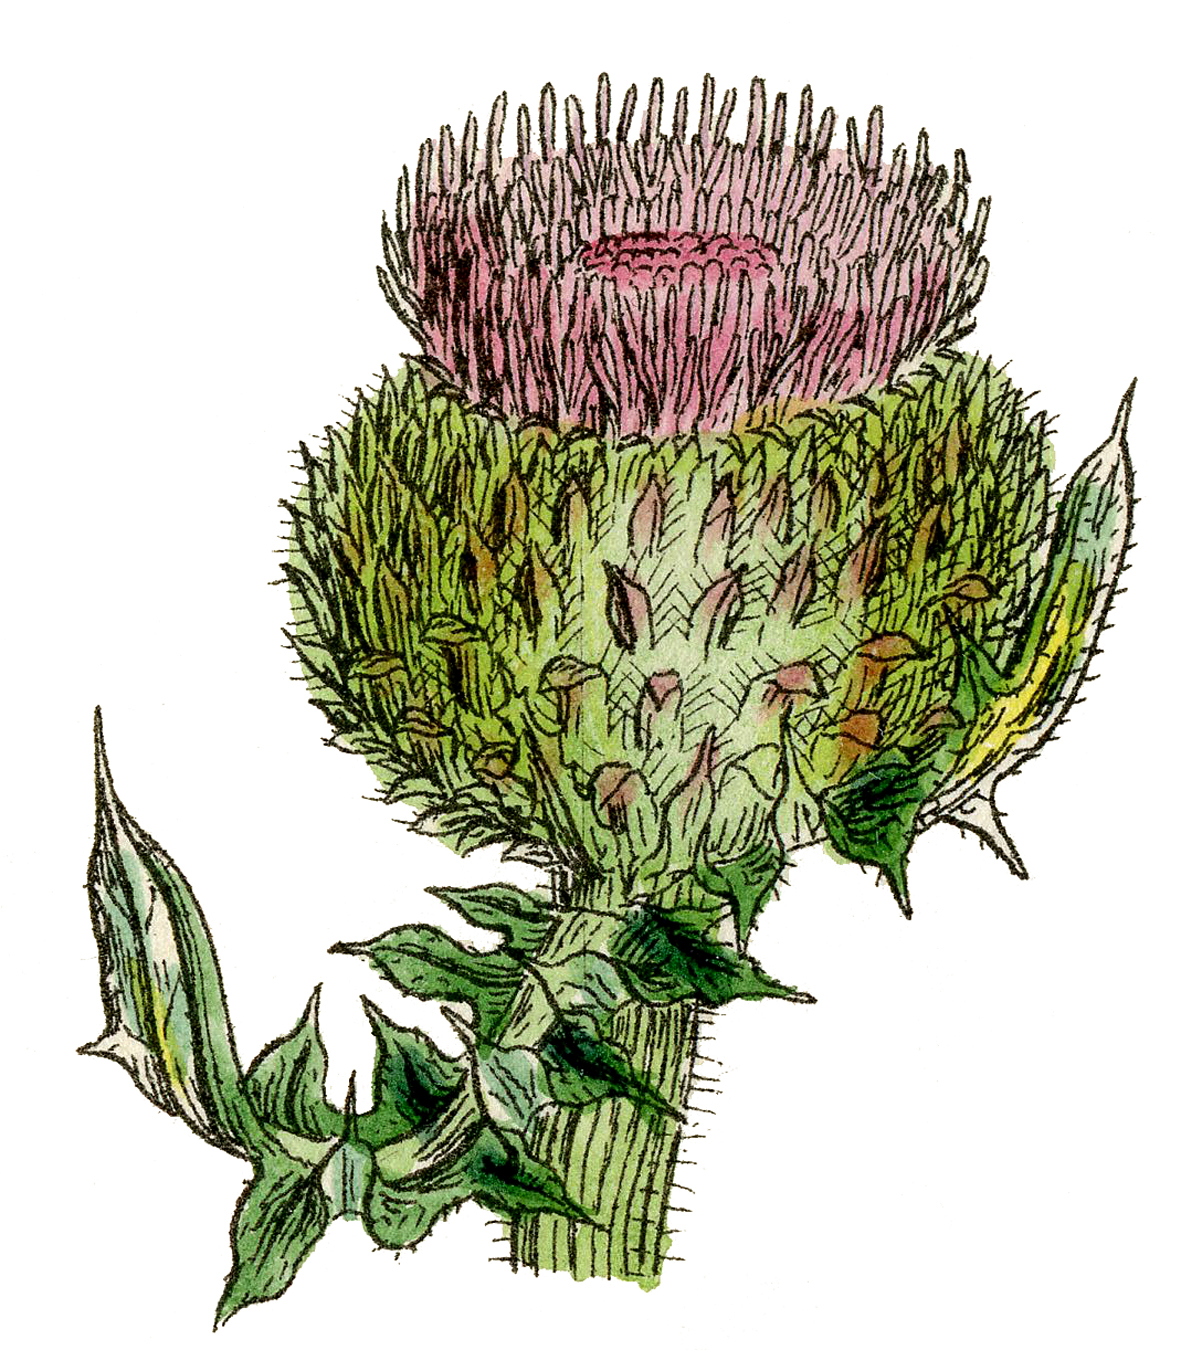 11 Thistle Pictures - Rustic Flowers! - The Graphics Fairy